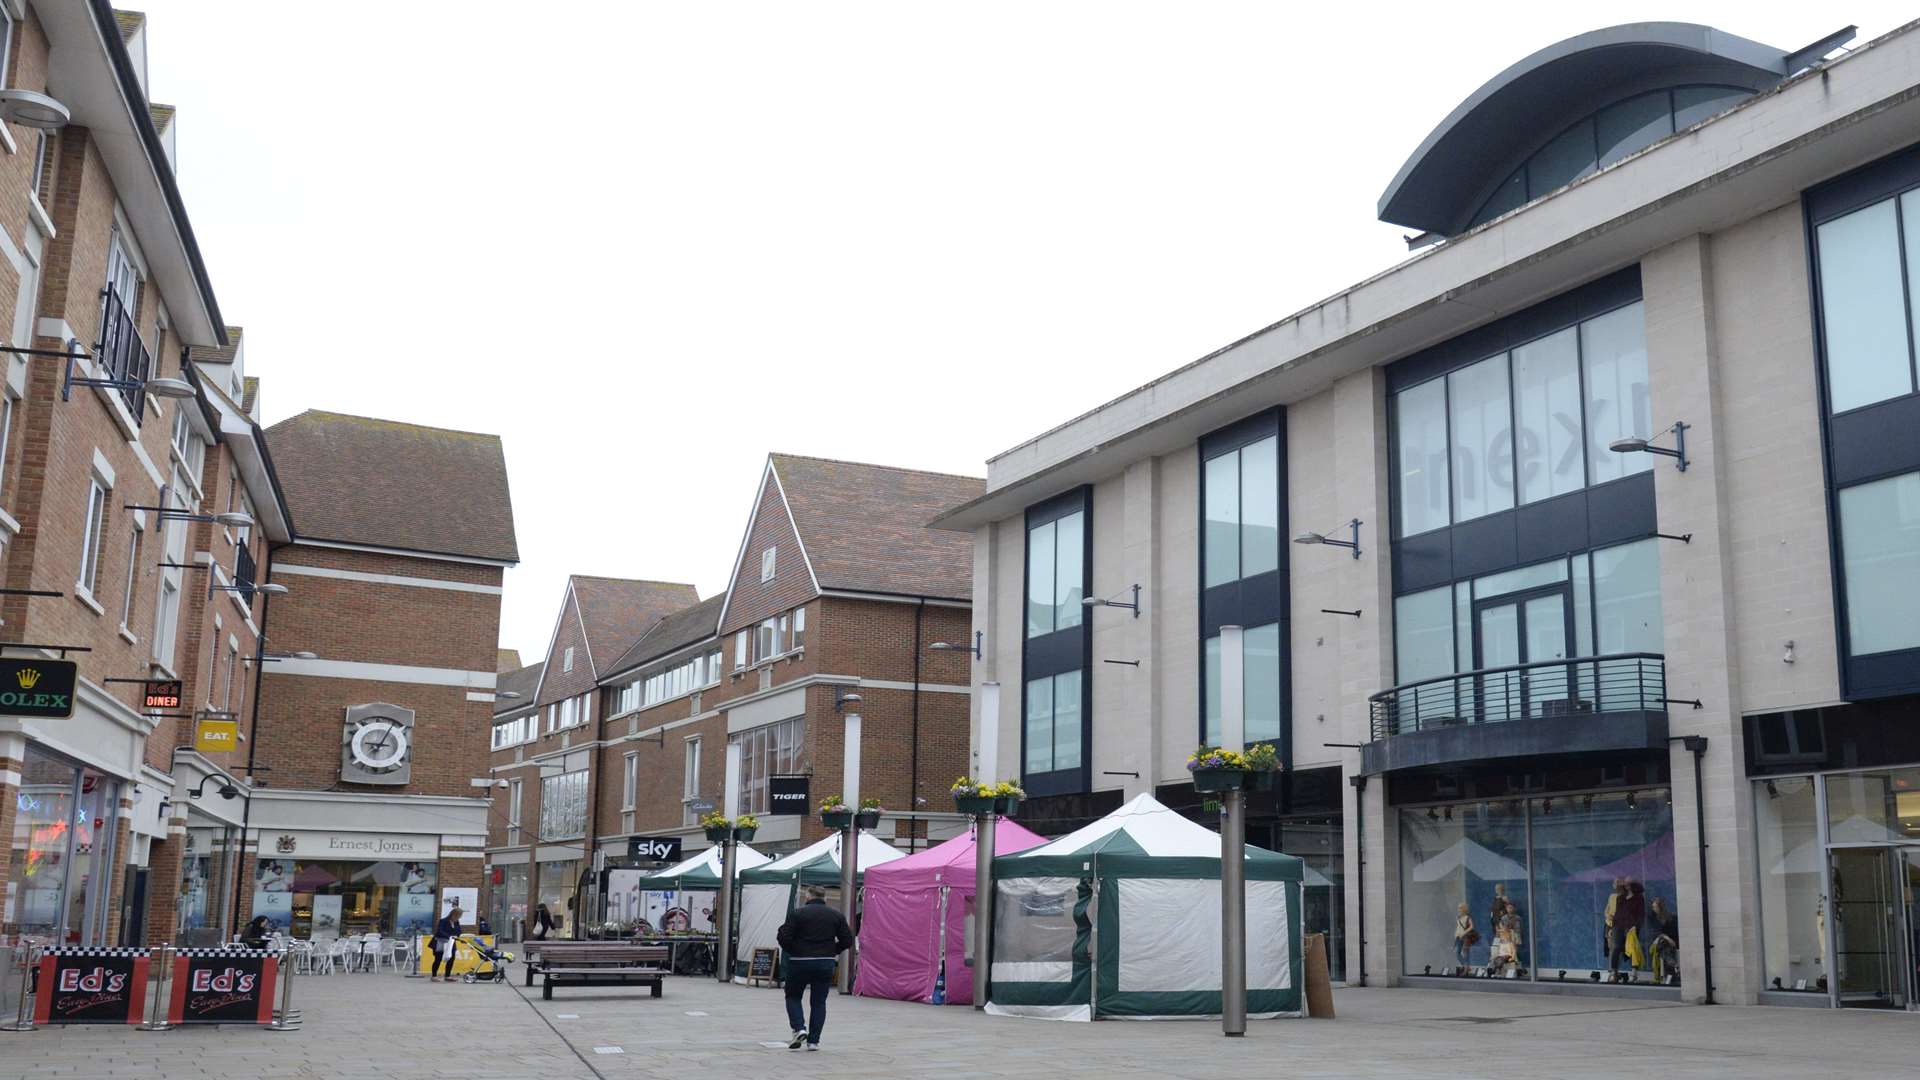 Half of Whitefriars has been sold to the council for £79 million.